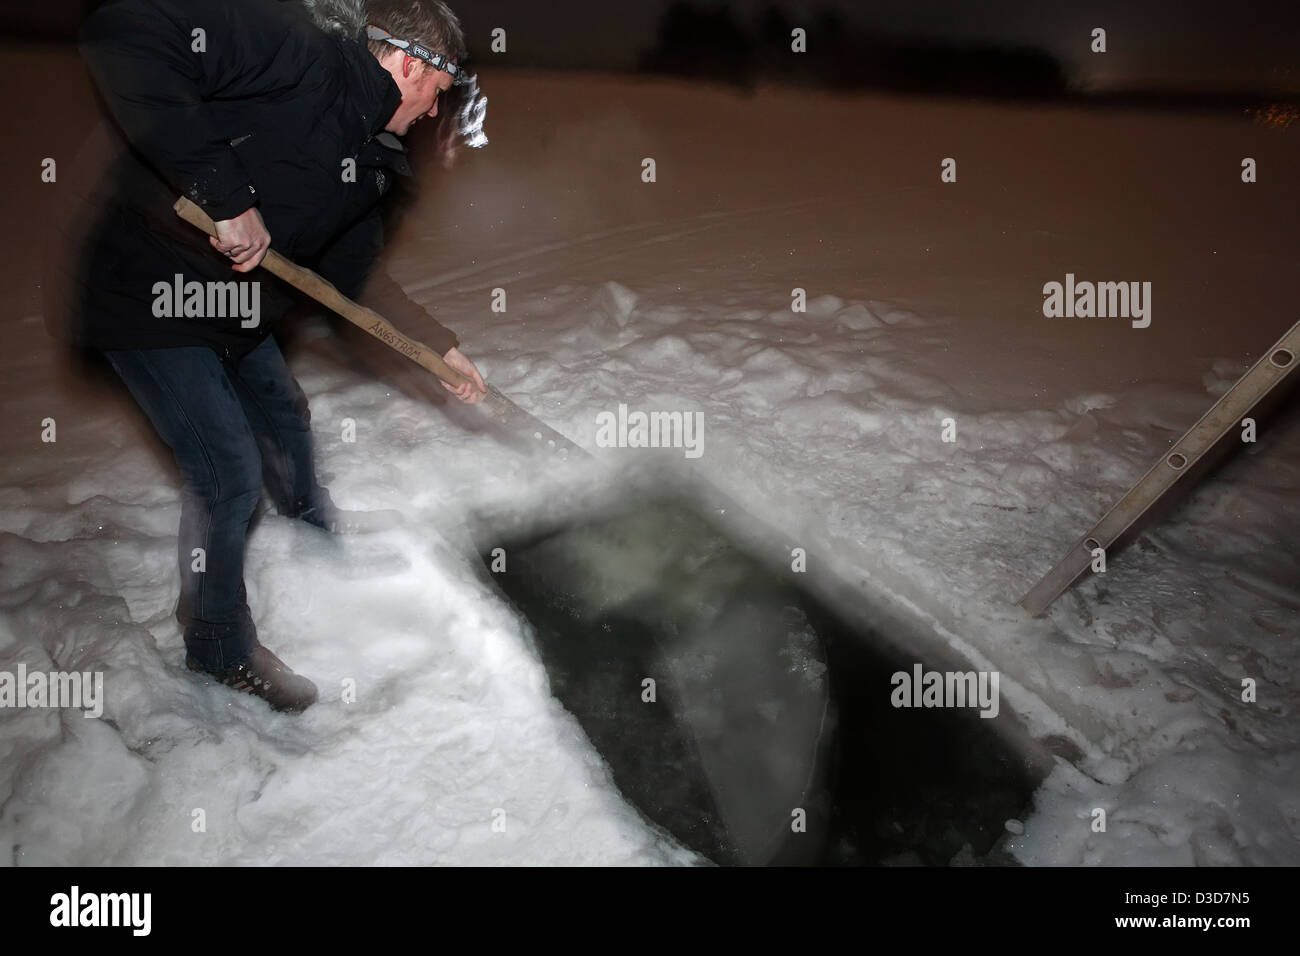 Dill, Sweden, a man opens a Eissaege again the frozen swimming hole Stock Photo